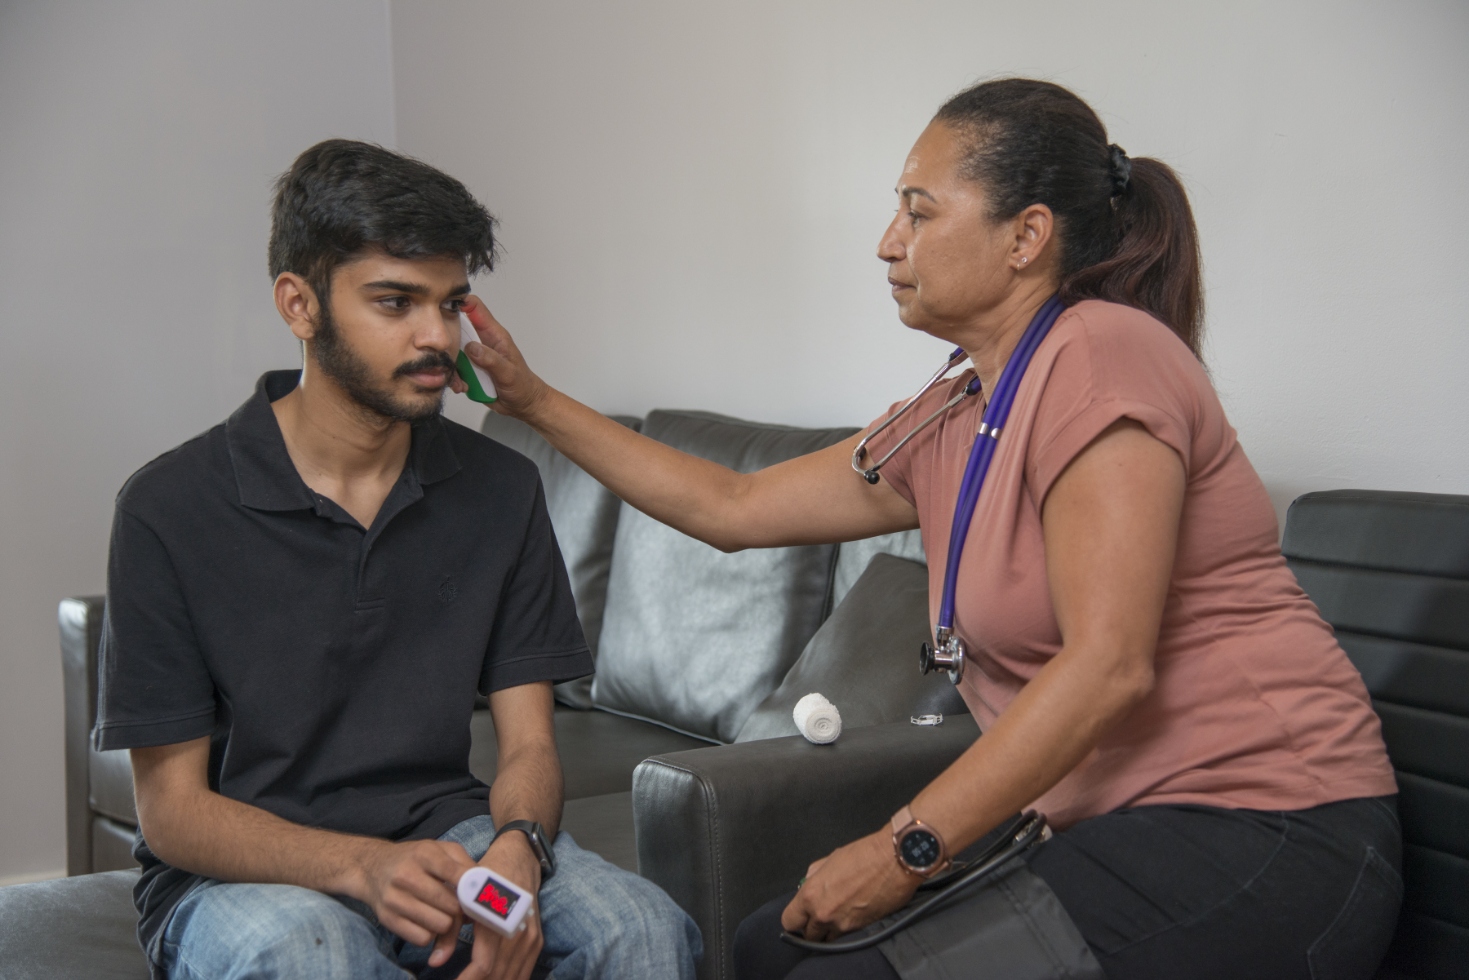 NDIS Support Worker Checking Client's Vital Signs